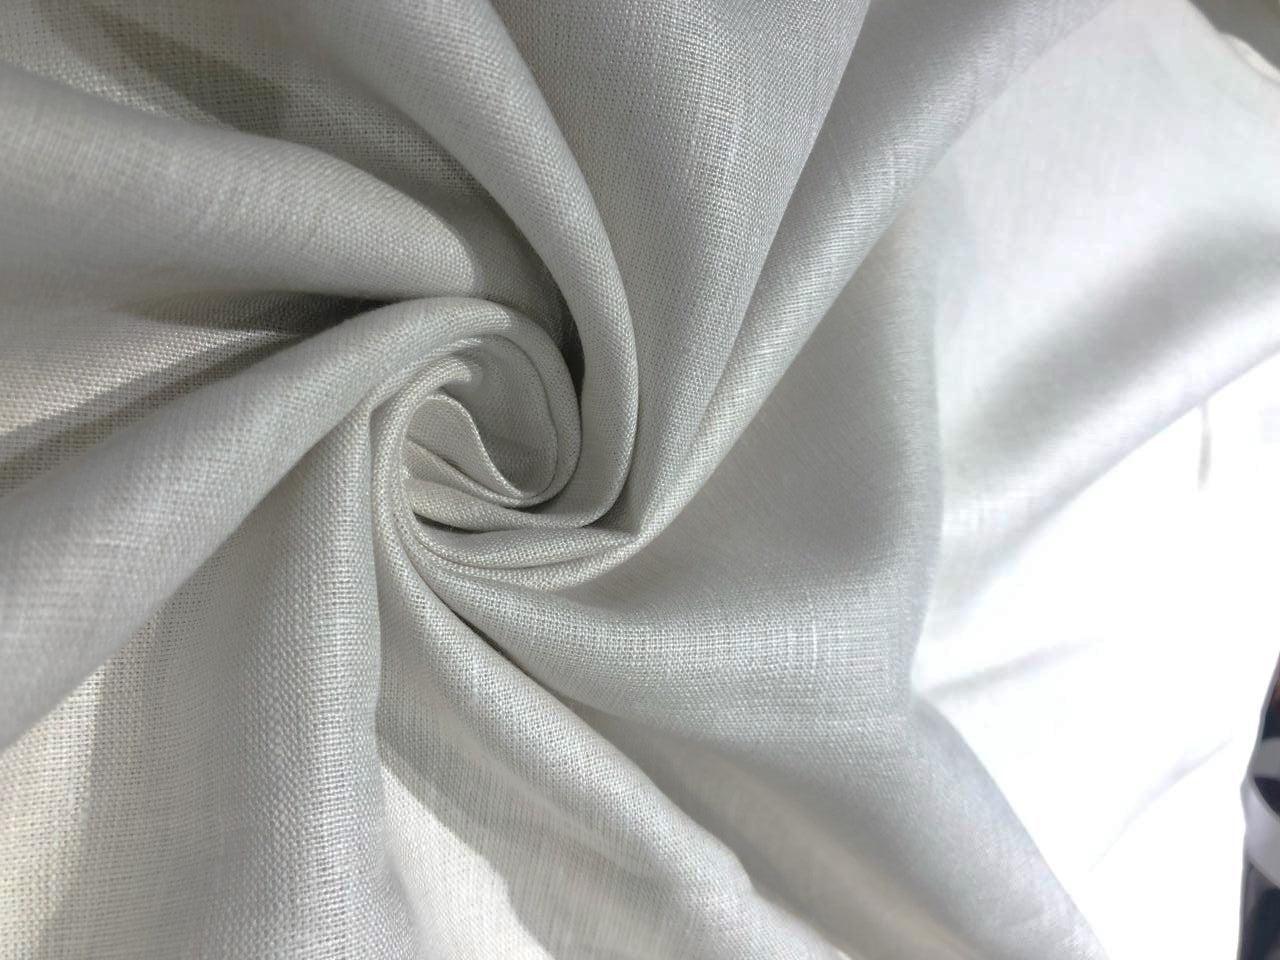 Hemp 55% Cotton 45% Suiting fabric 58 inches wide  beige and natural white is premium linen suiting